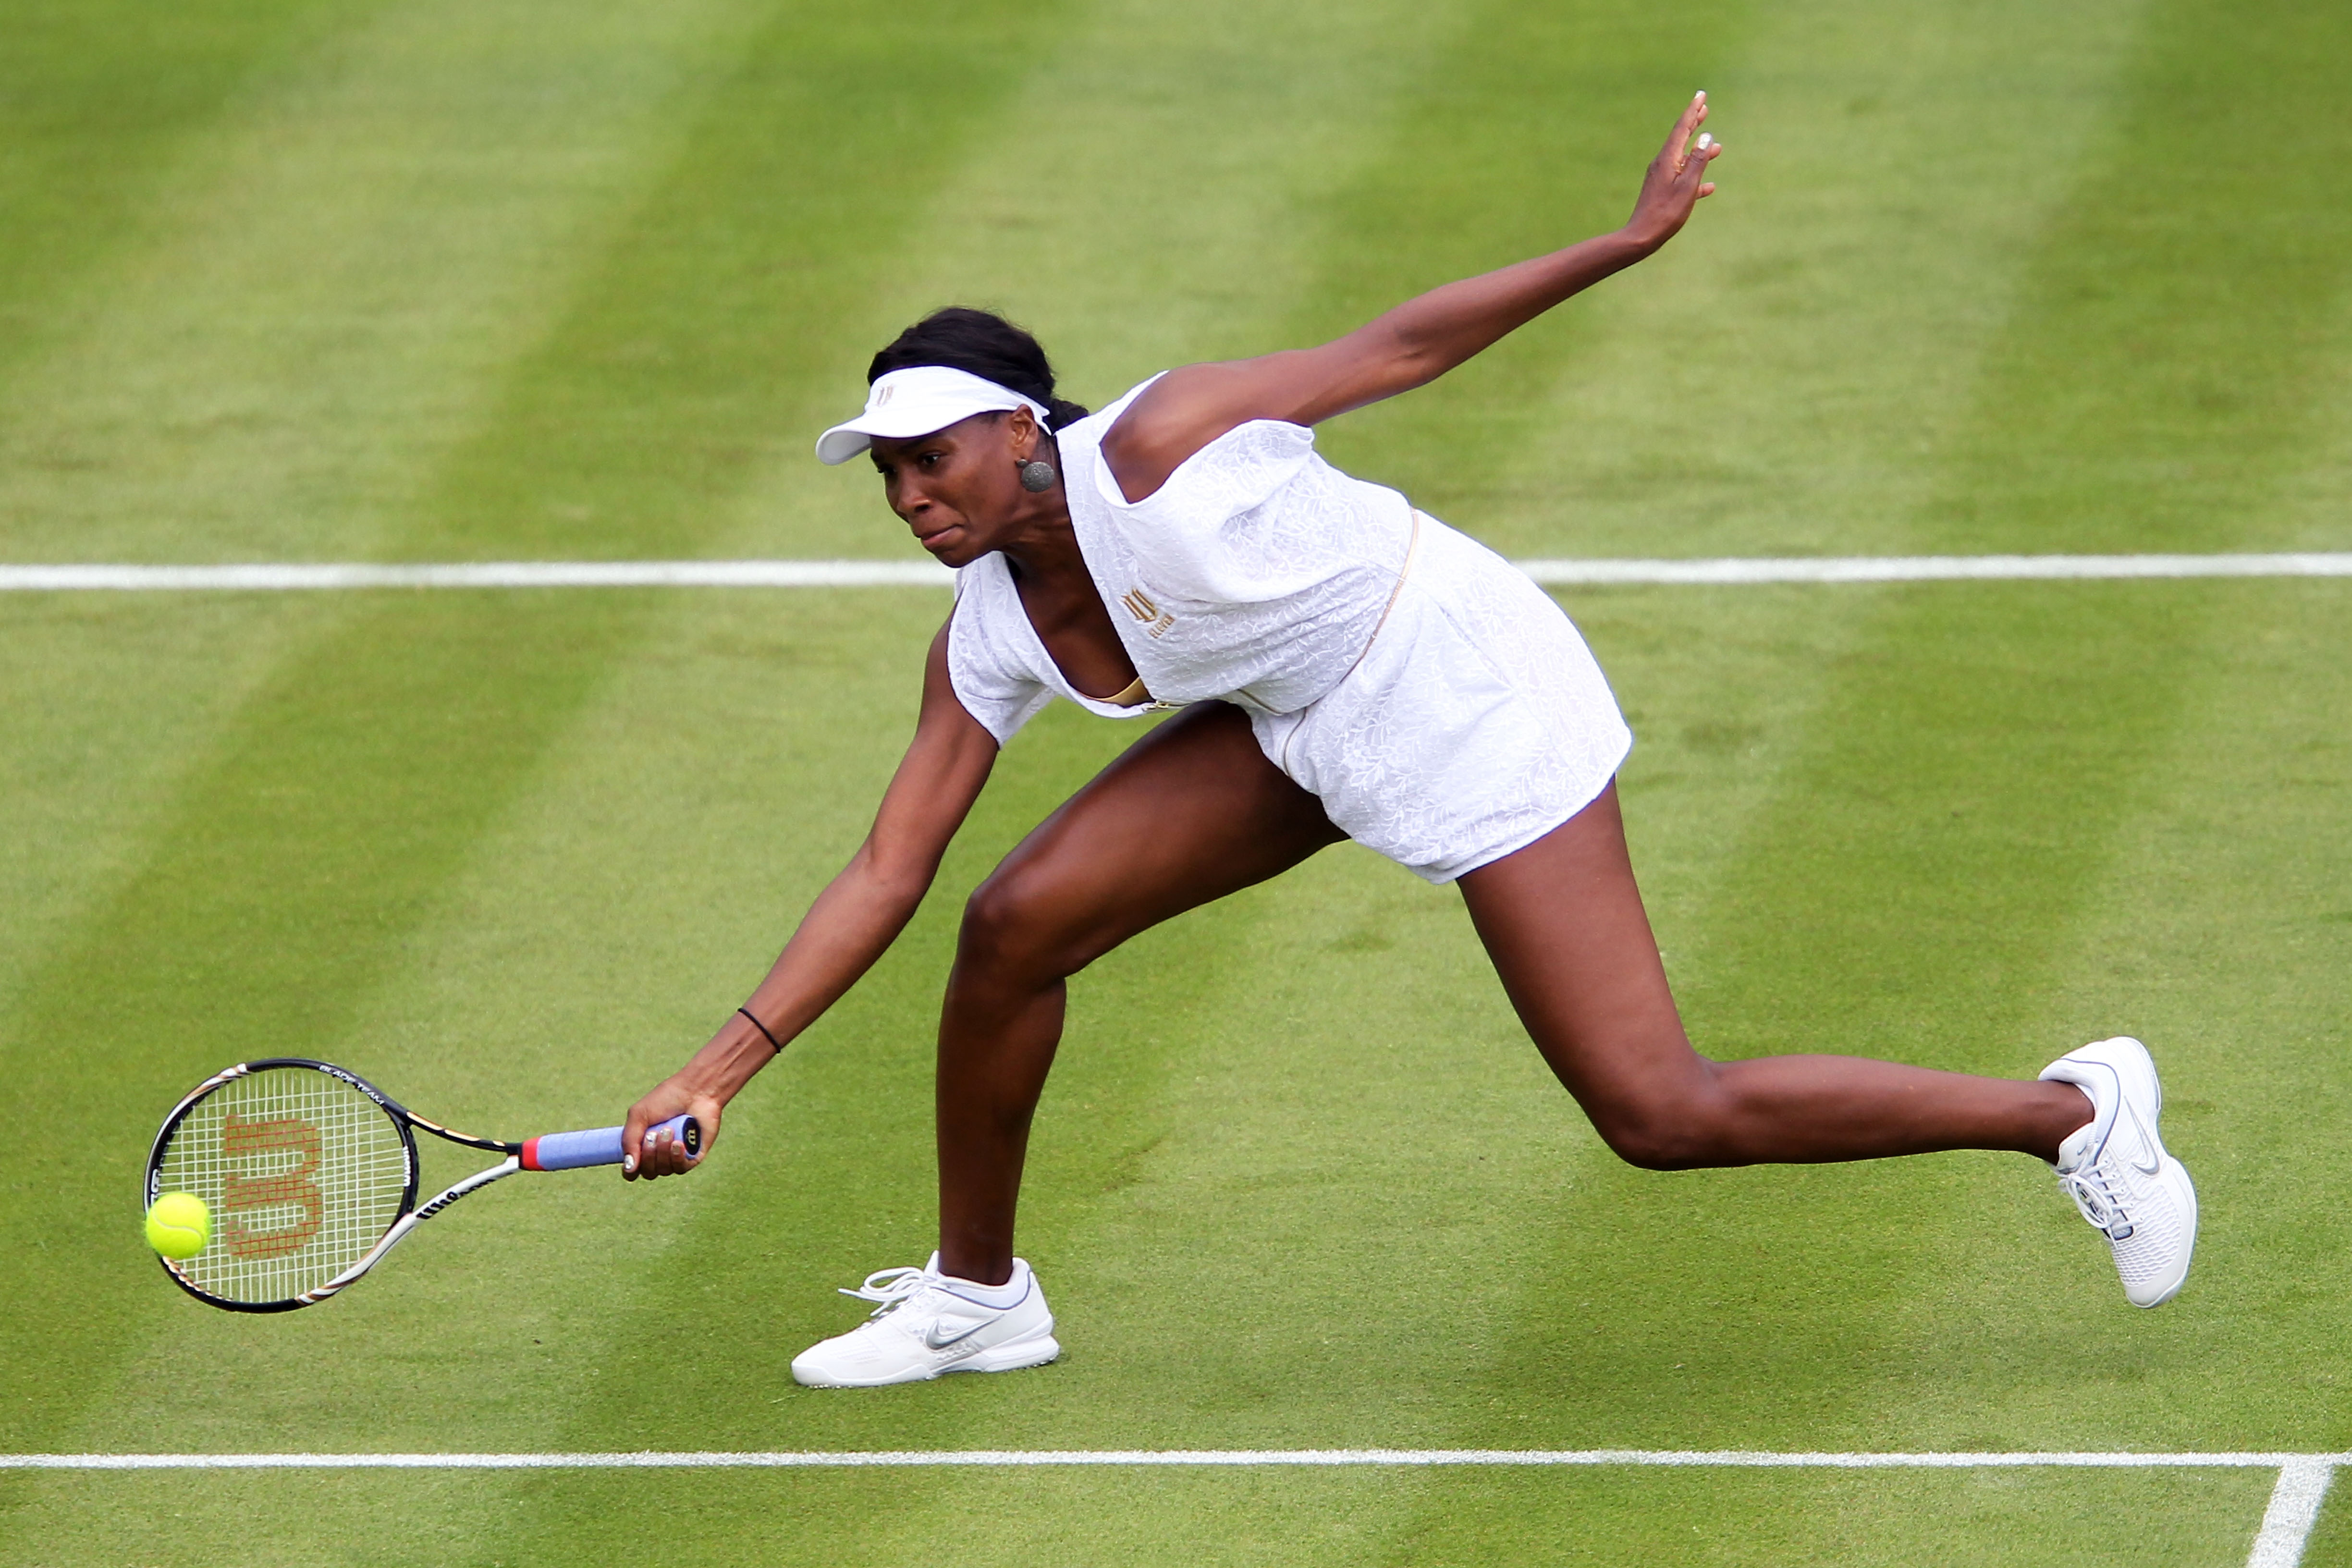 LONDON, ENGLAND - JUNE 20:  Venus Williams of the United States returns a shot during her first round match Akgul Amanmuradova of Uzbekistan on Day One of the Wimbledon Lawn Tennis Championships at the All England Lawn Tennis and Croquet Club on June 20,